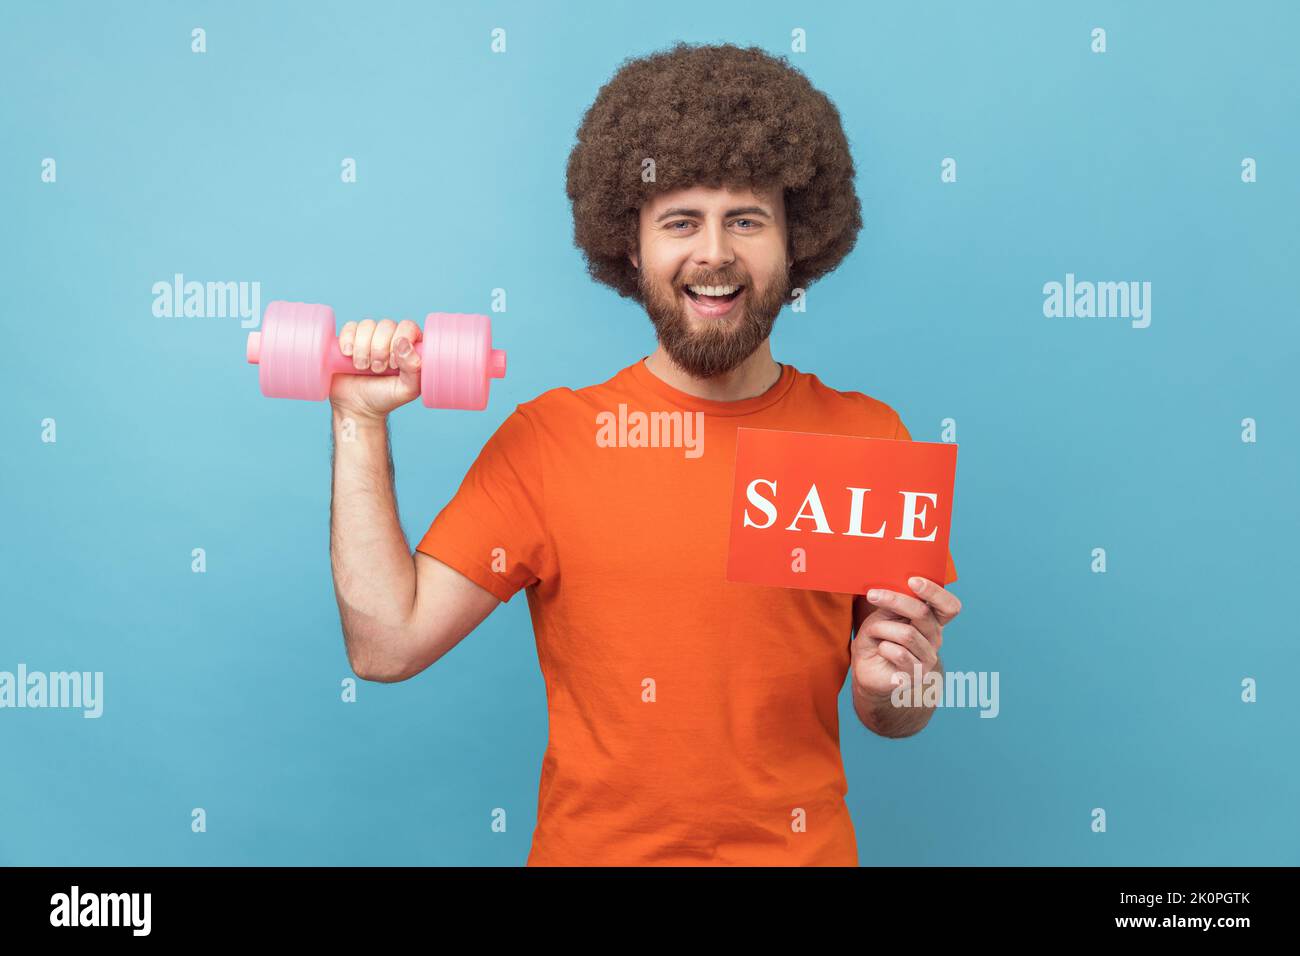 Portrait of satisfied man with Afro hairstyle wearing orange T-shirt holding dumbbell and card with sale inscription, sales for fitness workout. Indoor studio shot isolated on blue background. Stock Photo